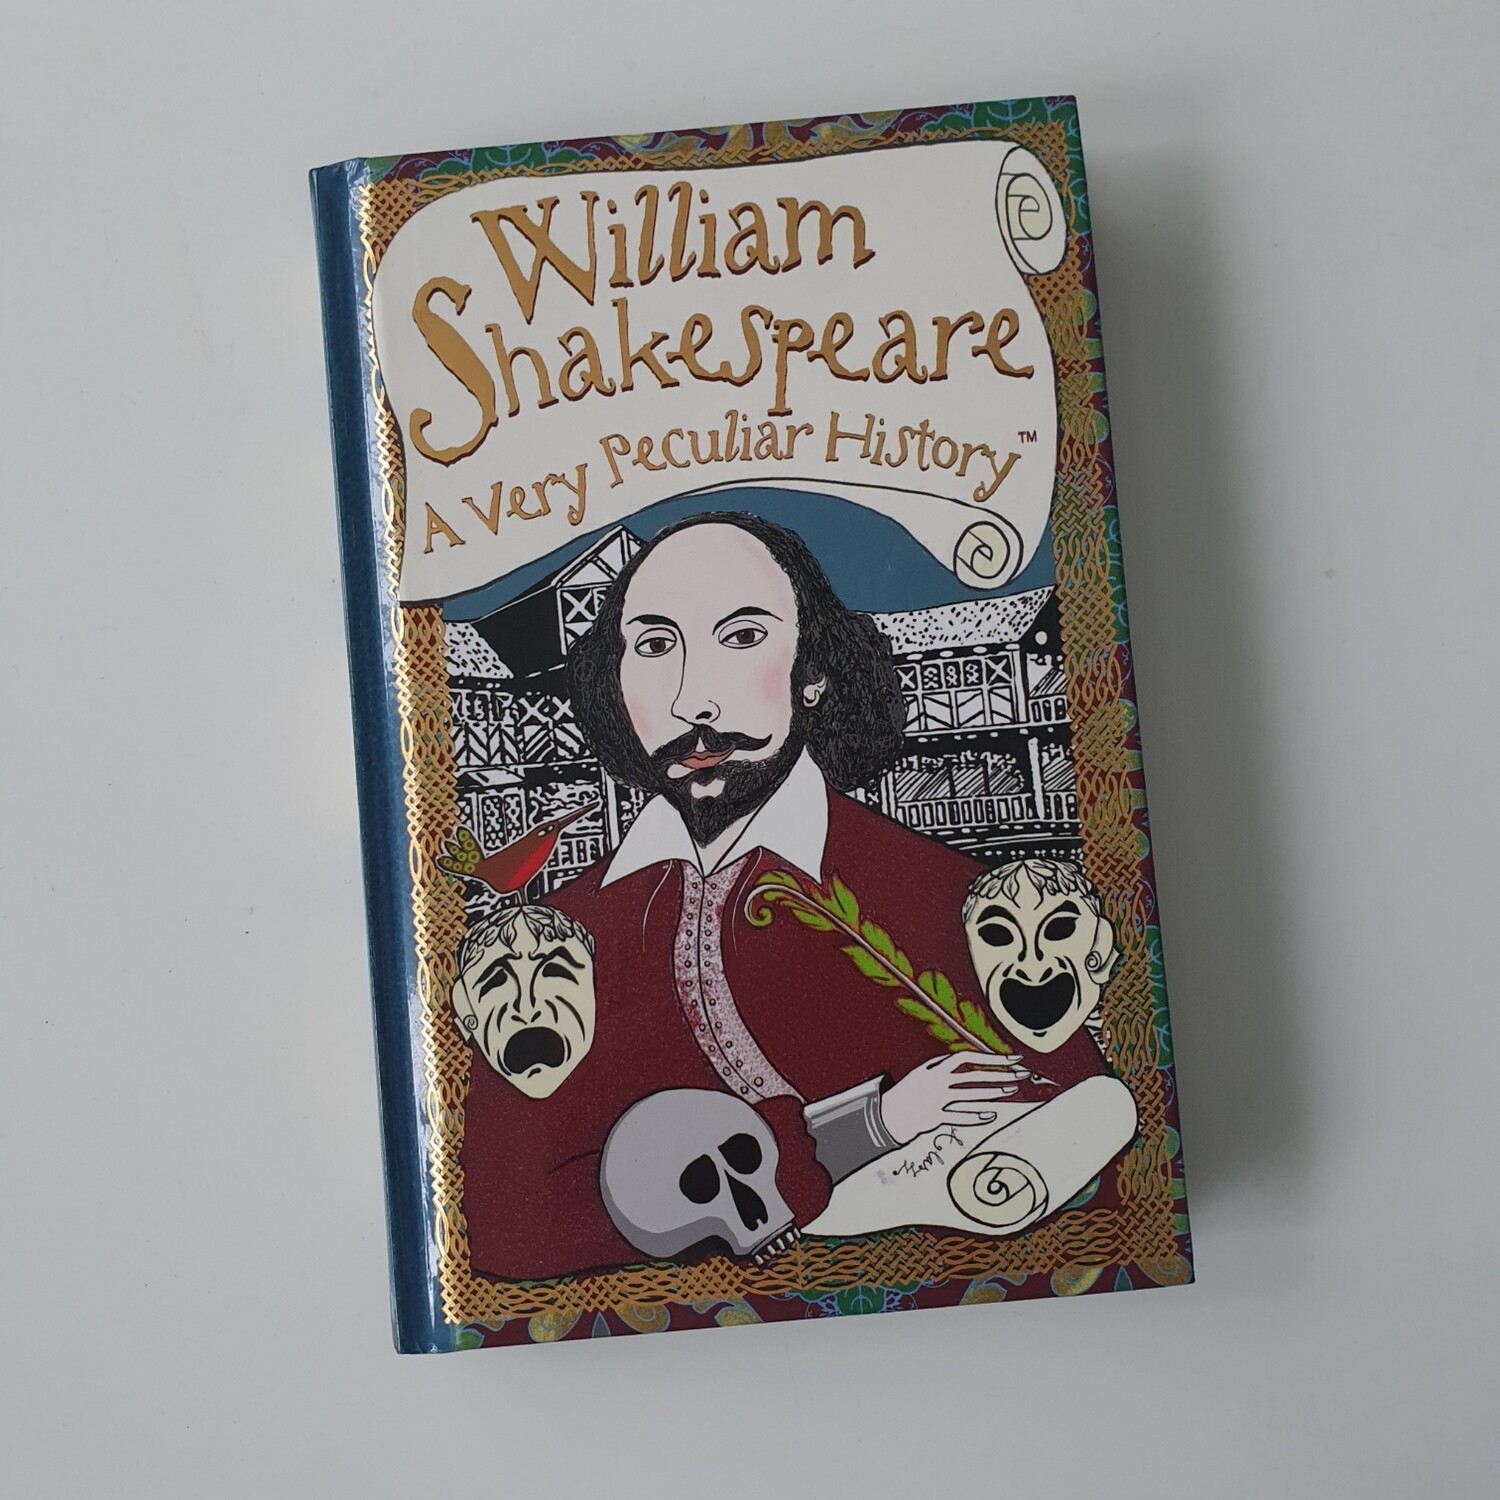 William Shakespeare - A Very Peculiar History